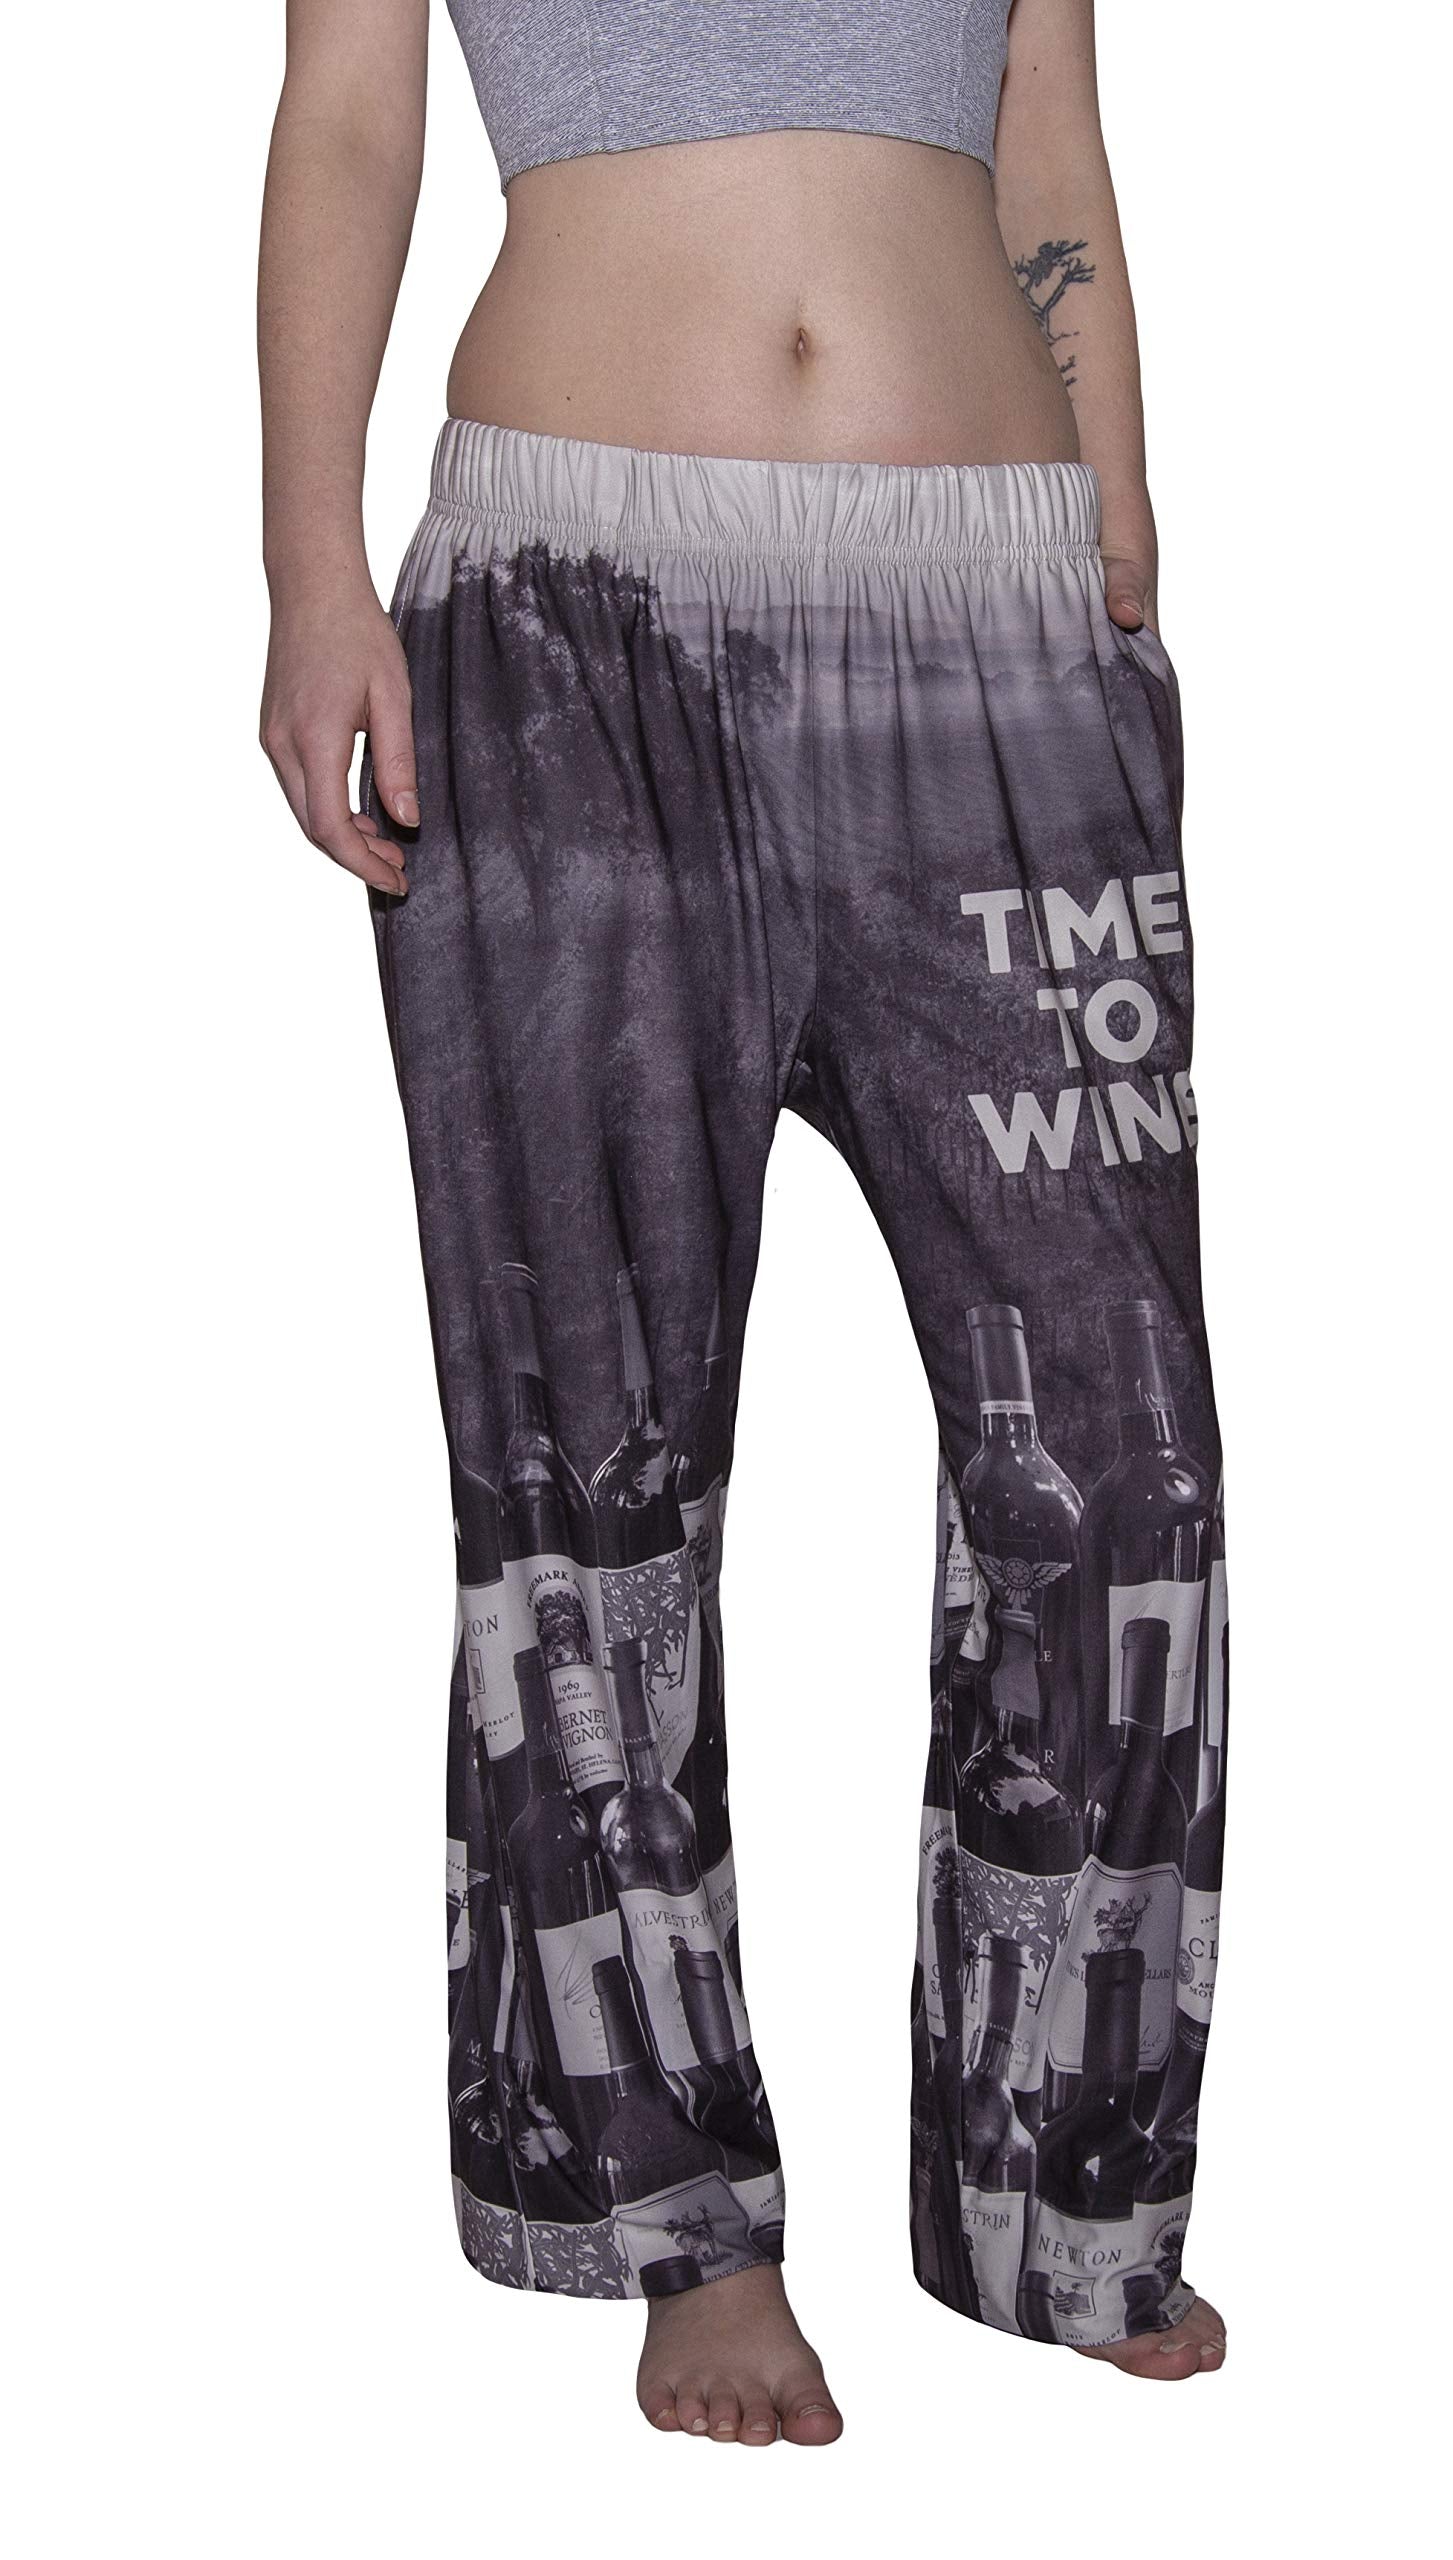 Waist down photo of model wearing Time To Wine pajama lounge pants front view (white background)